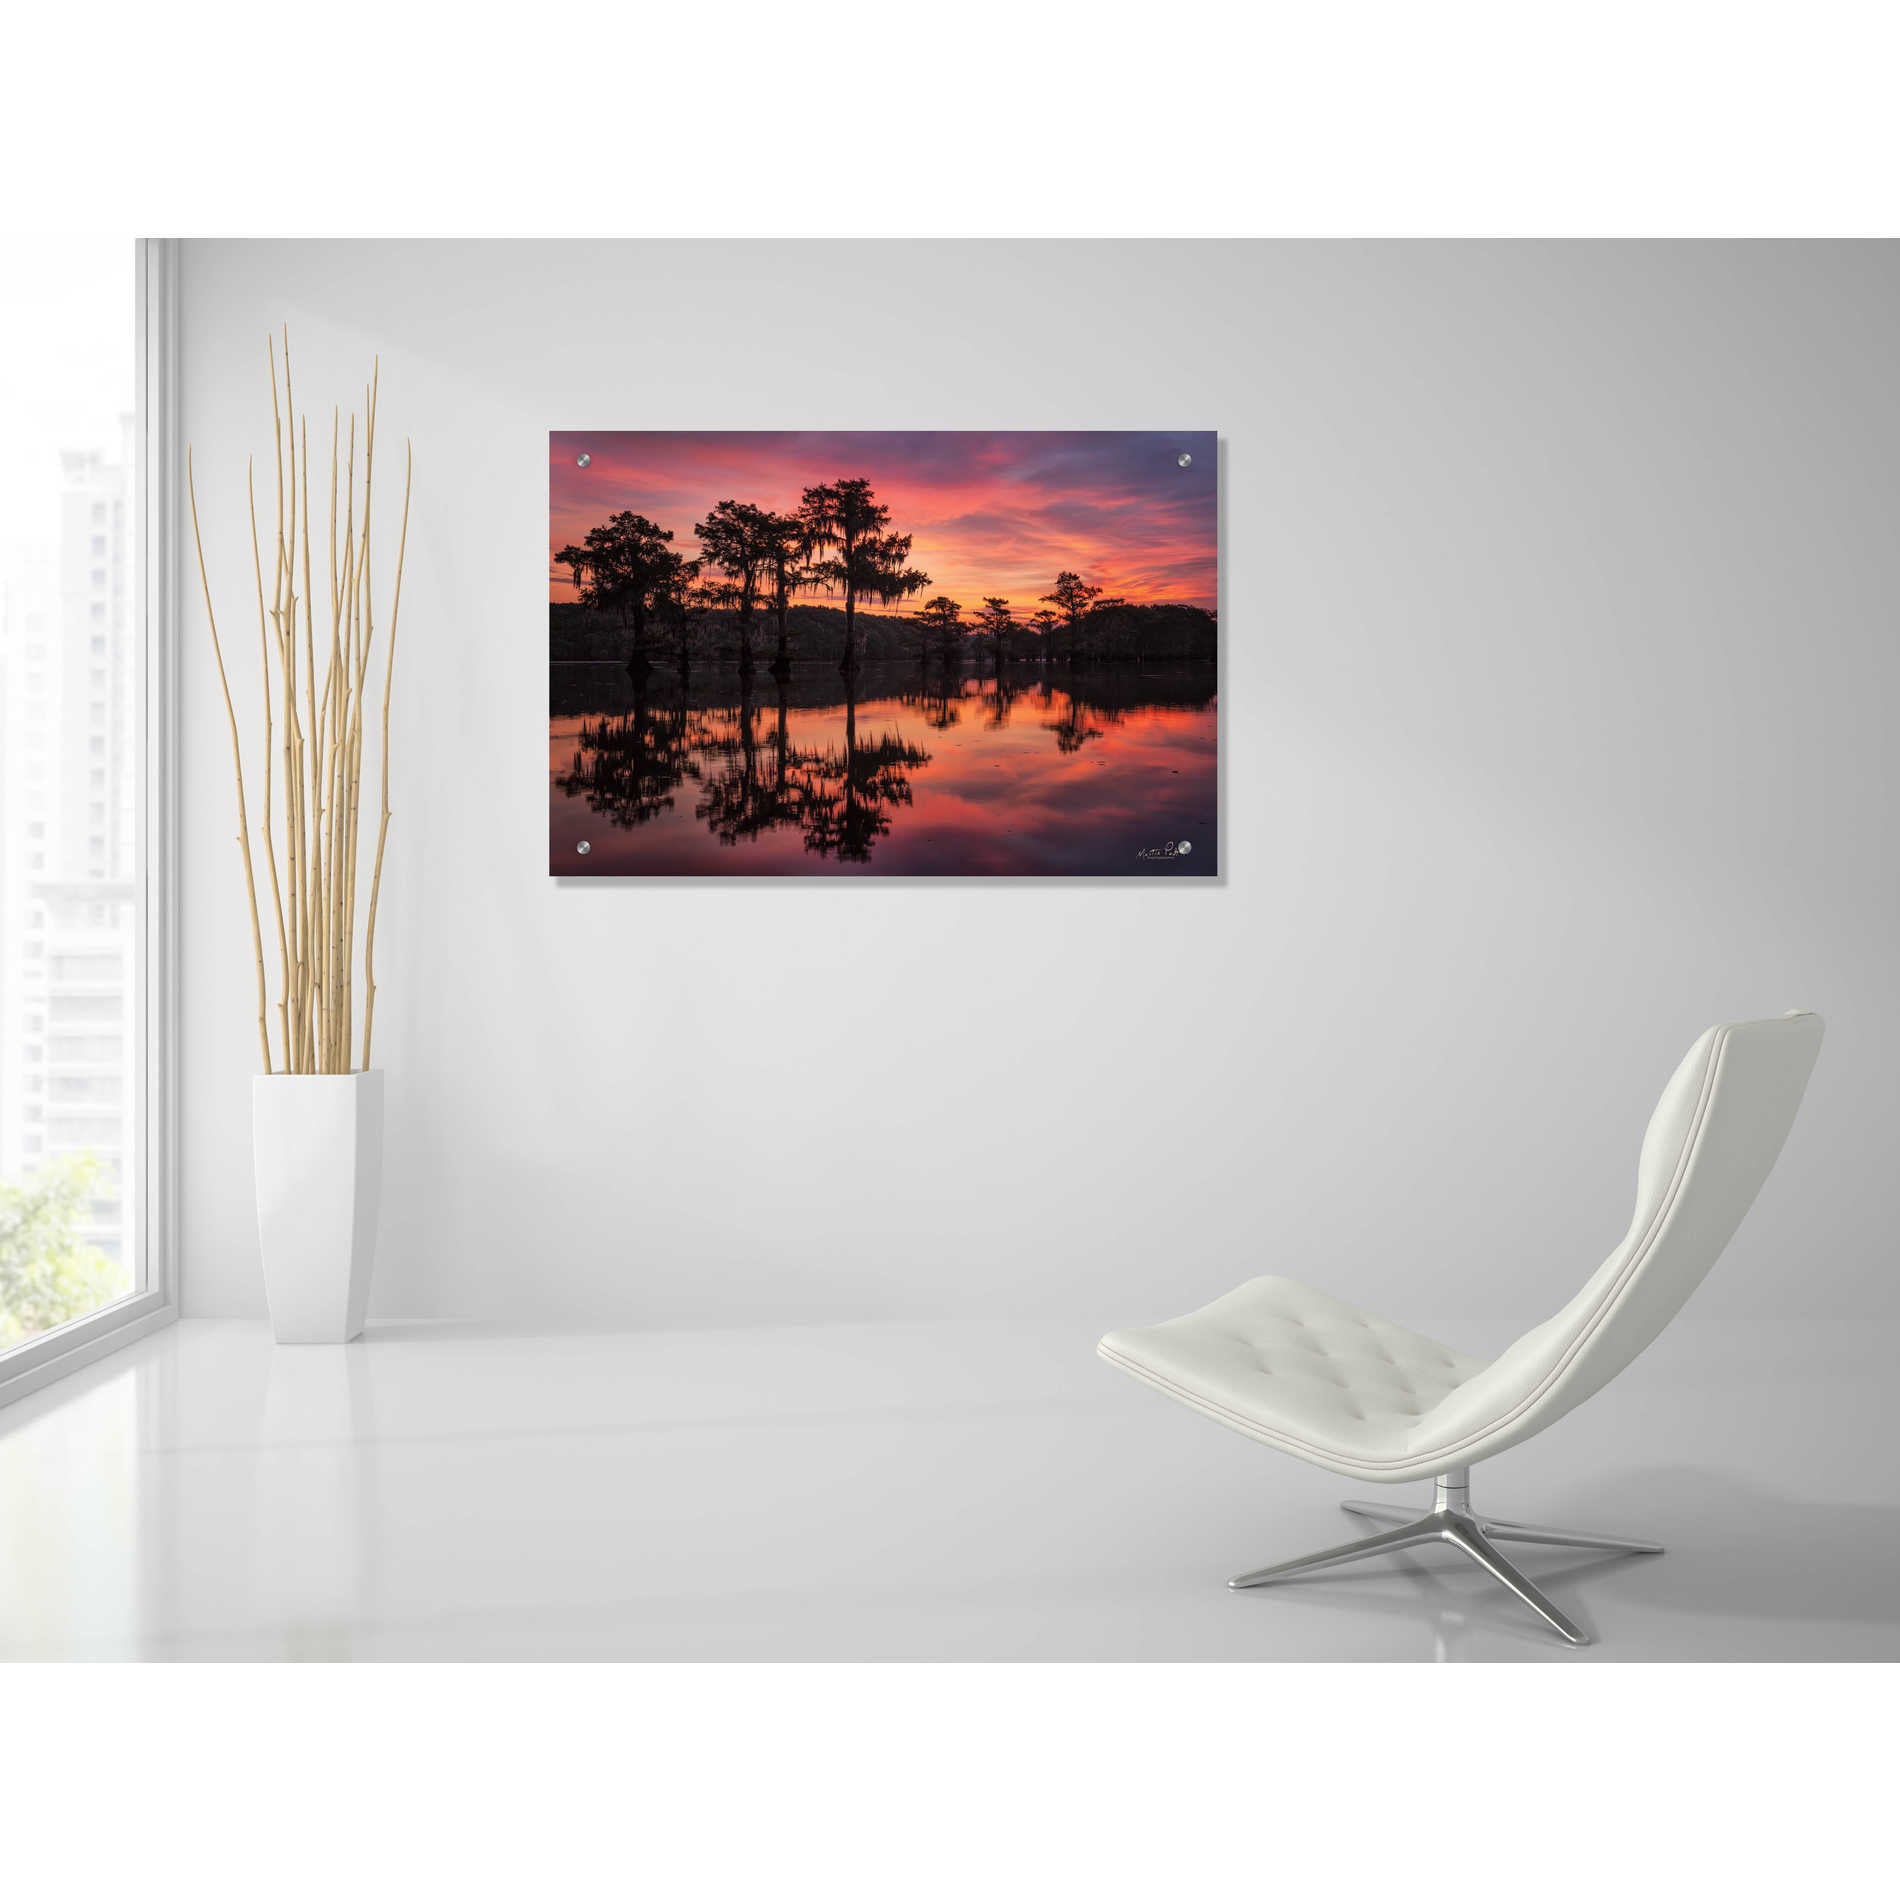 Epic Art 'Swamp on Fire' by Martin Podt, Acrylic Glass Wall Art,36x24